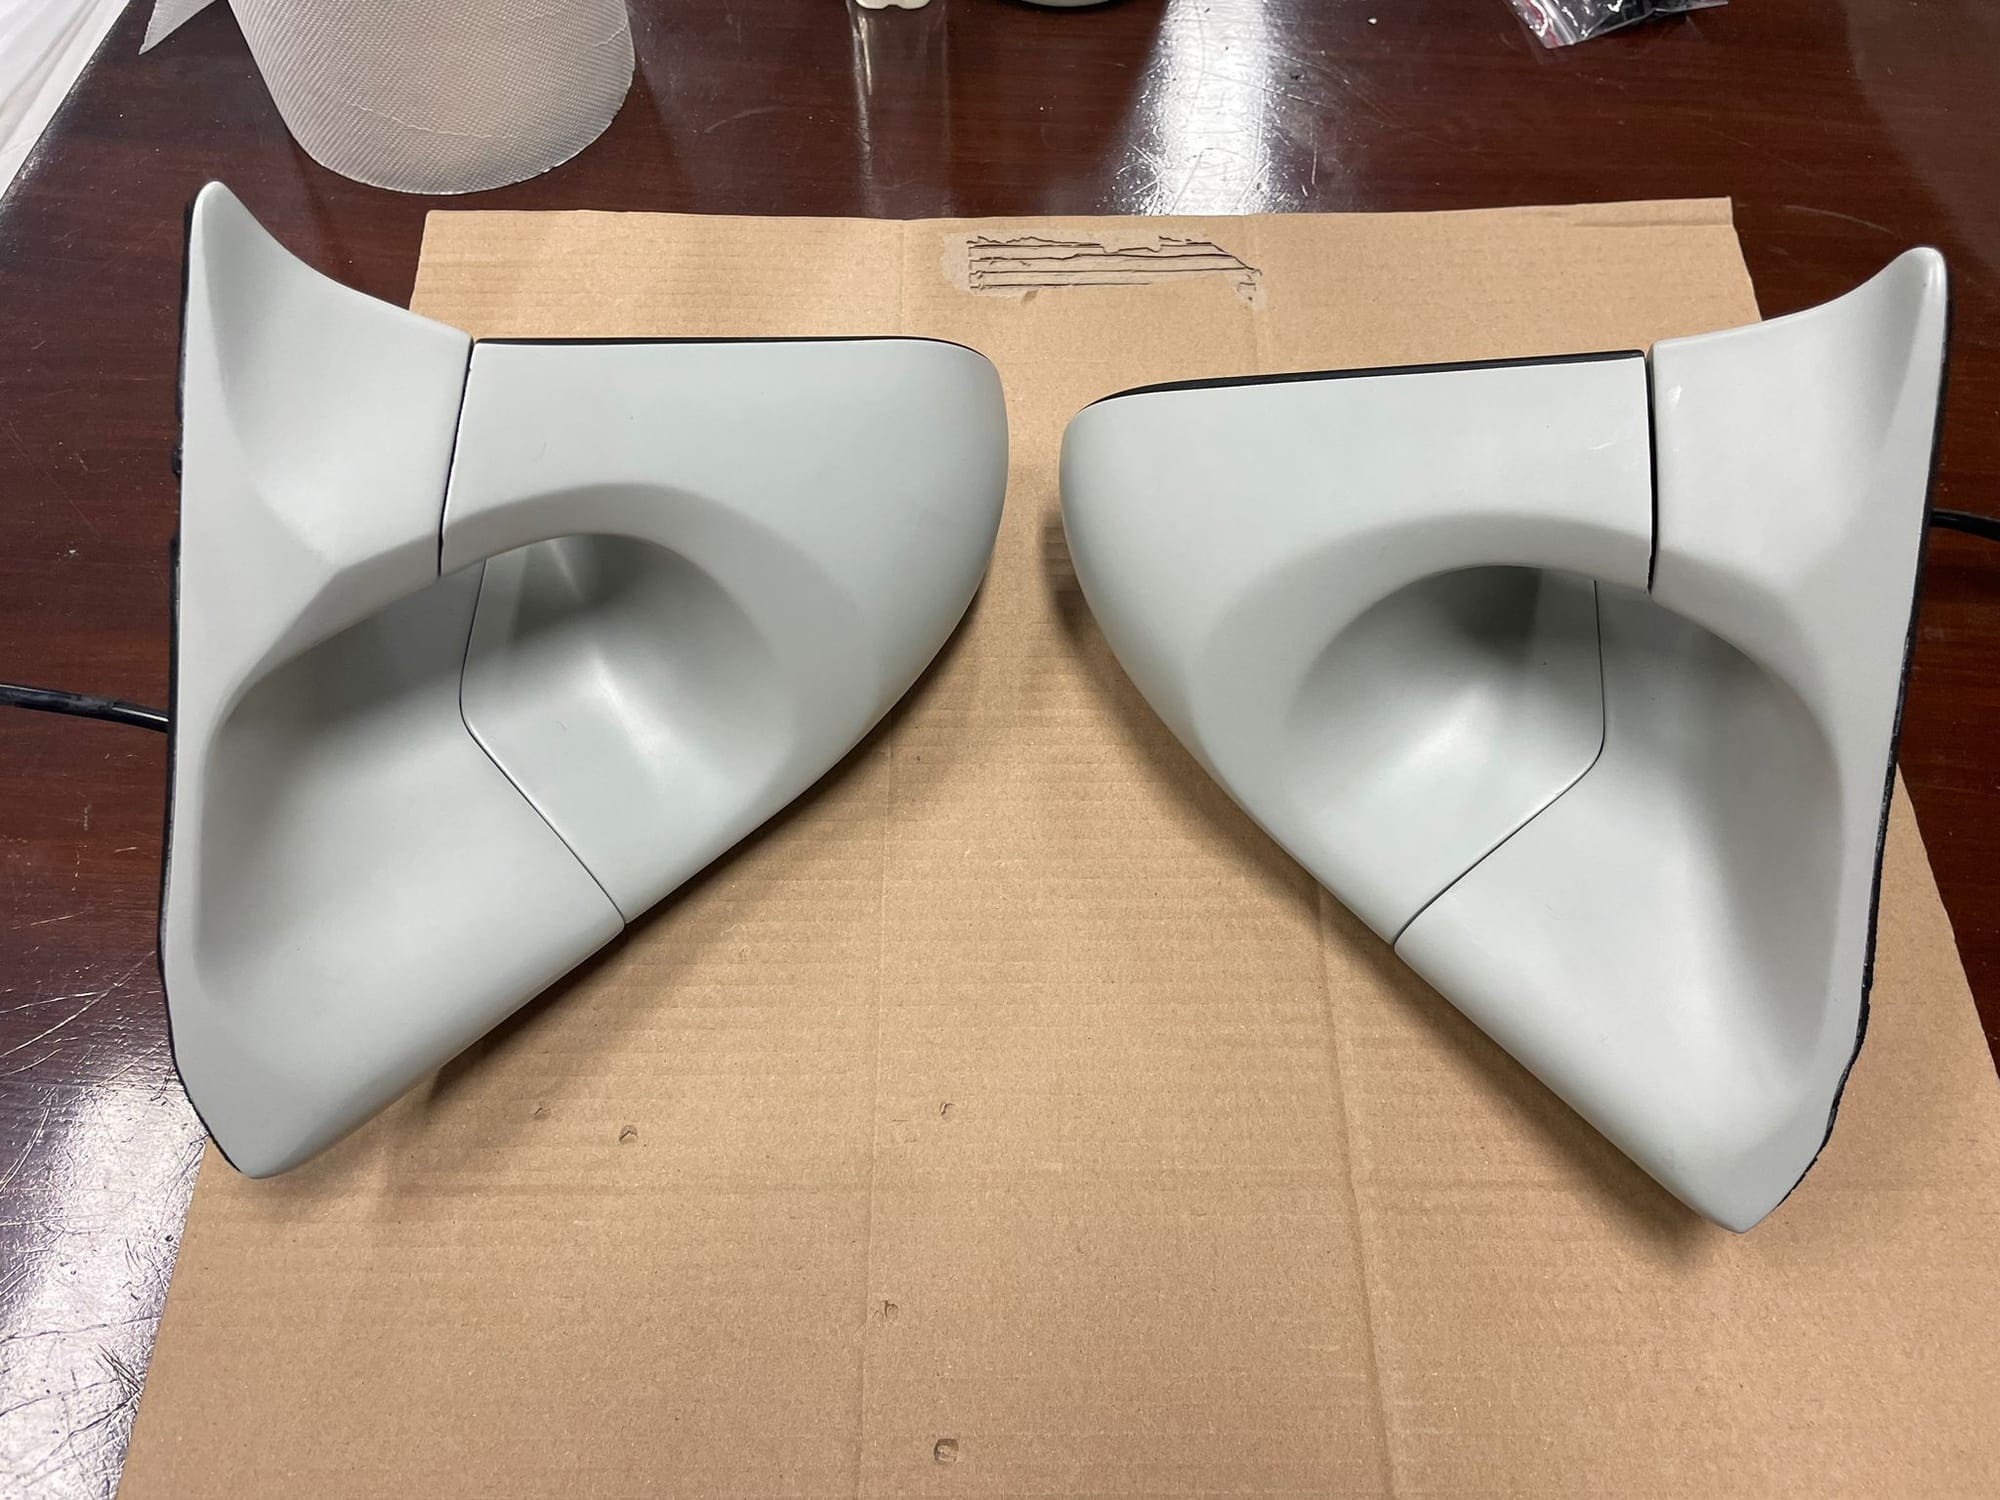 Exterior Body Parts - Authentic FD Ganador mirrors - freshly primed and ready to paint - Used - Salt Lake City, UT 84102, United States